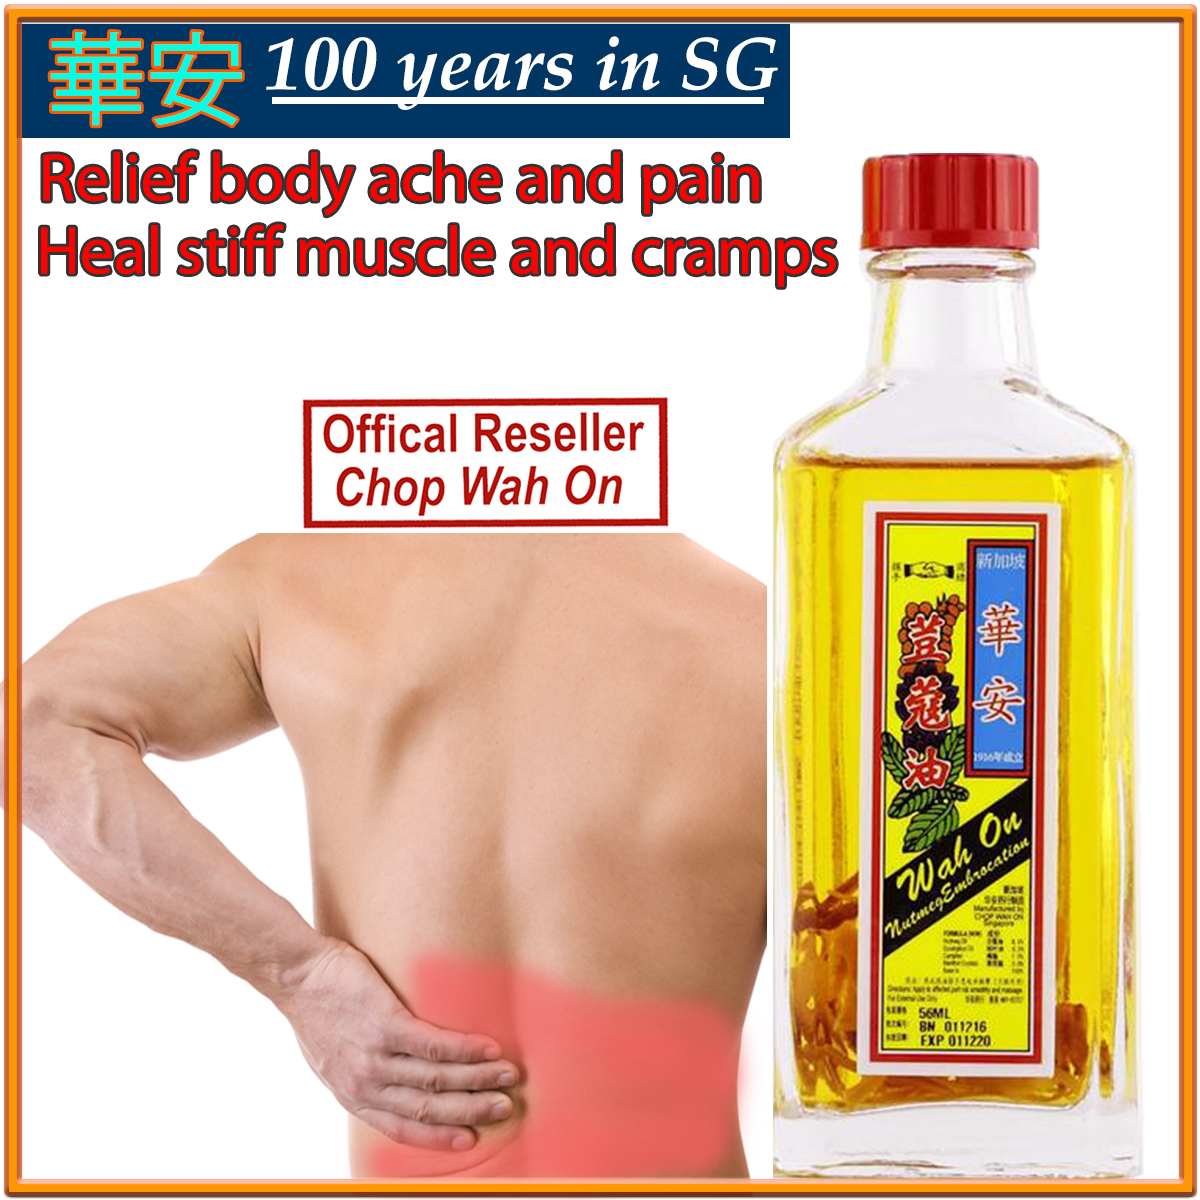 BeautyHope - New launch wellness products Citronella oil 香茅油，minyak serai  wangi Benefit for Rheumatism ,Fresh cut and wounds,Burns , skin com plains  and as Liniment especially after child birth and for Exterminating